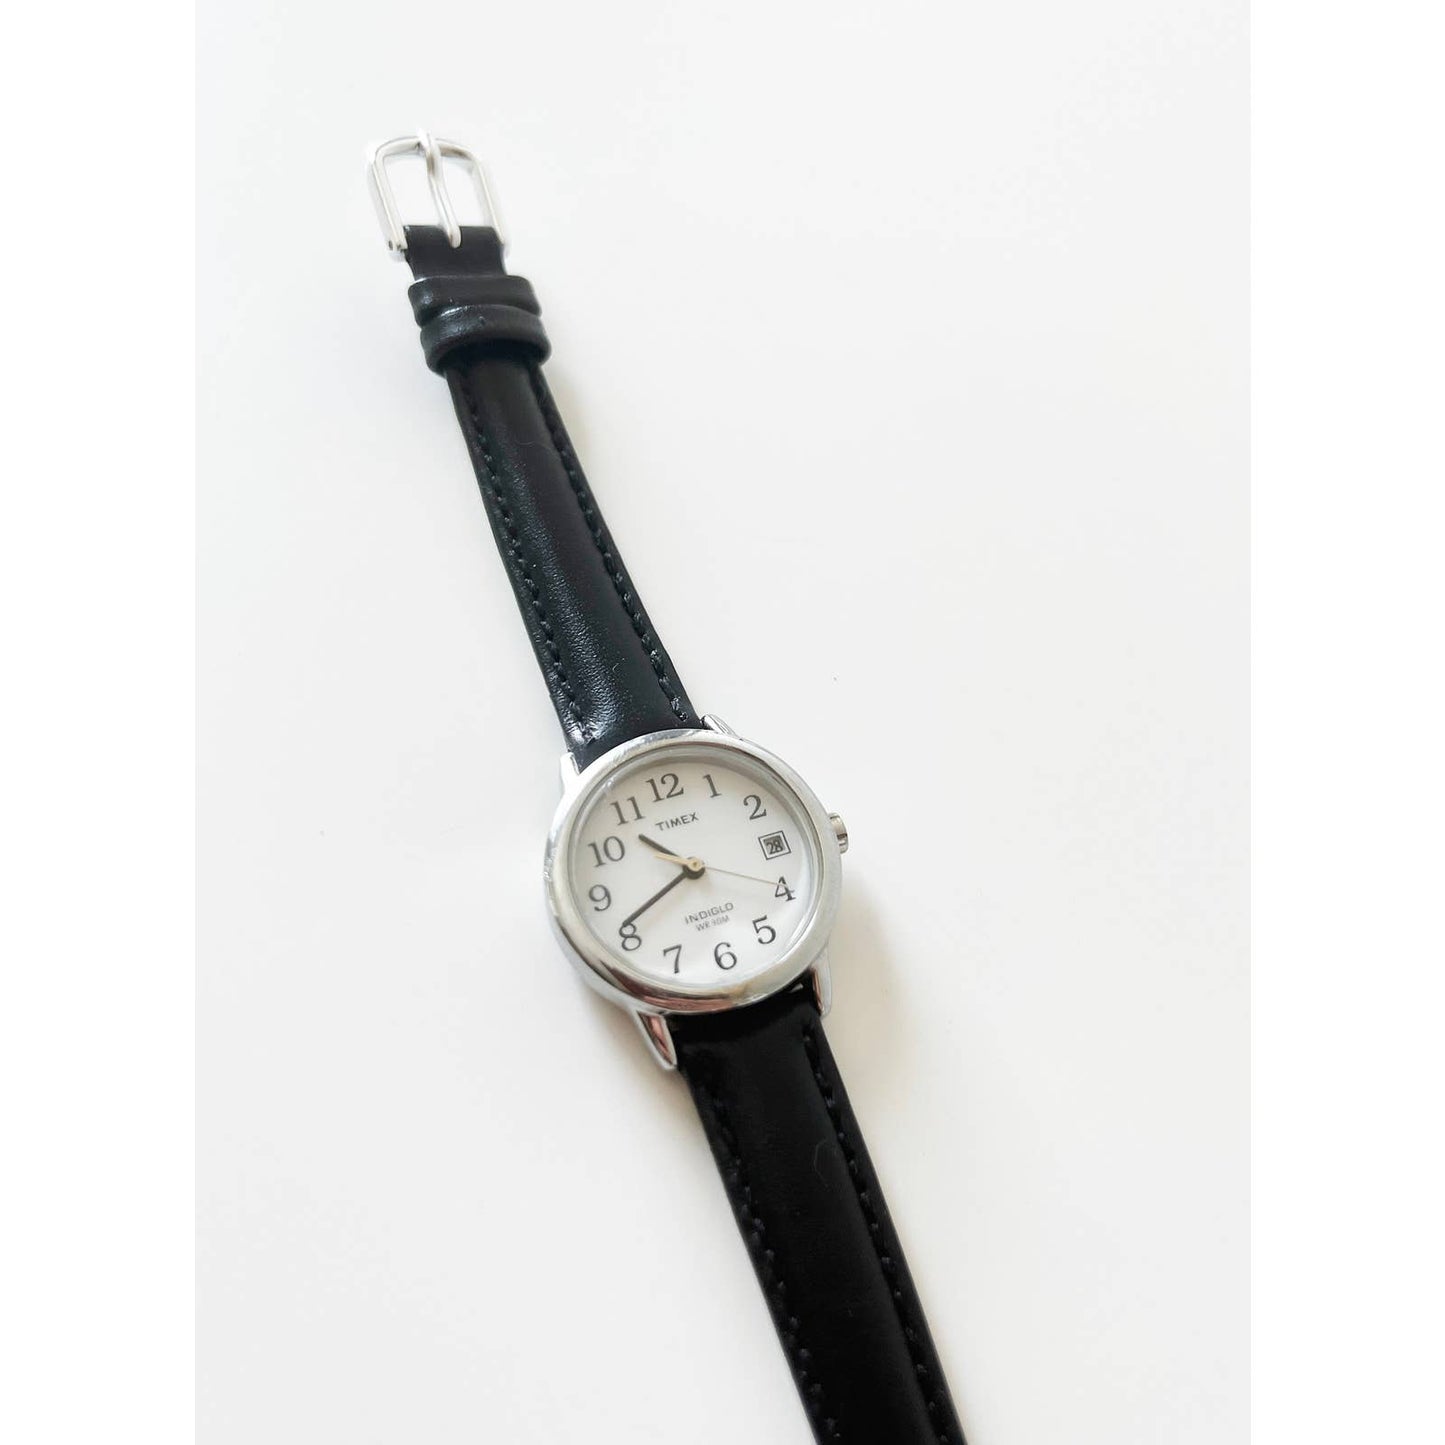 Vintage Leather Timex Watch with Silver Details | New Band and Battery